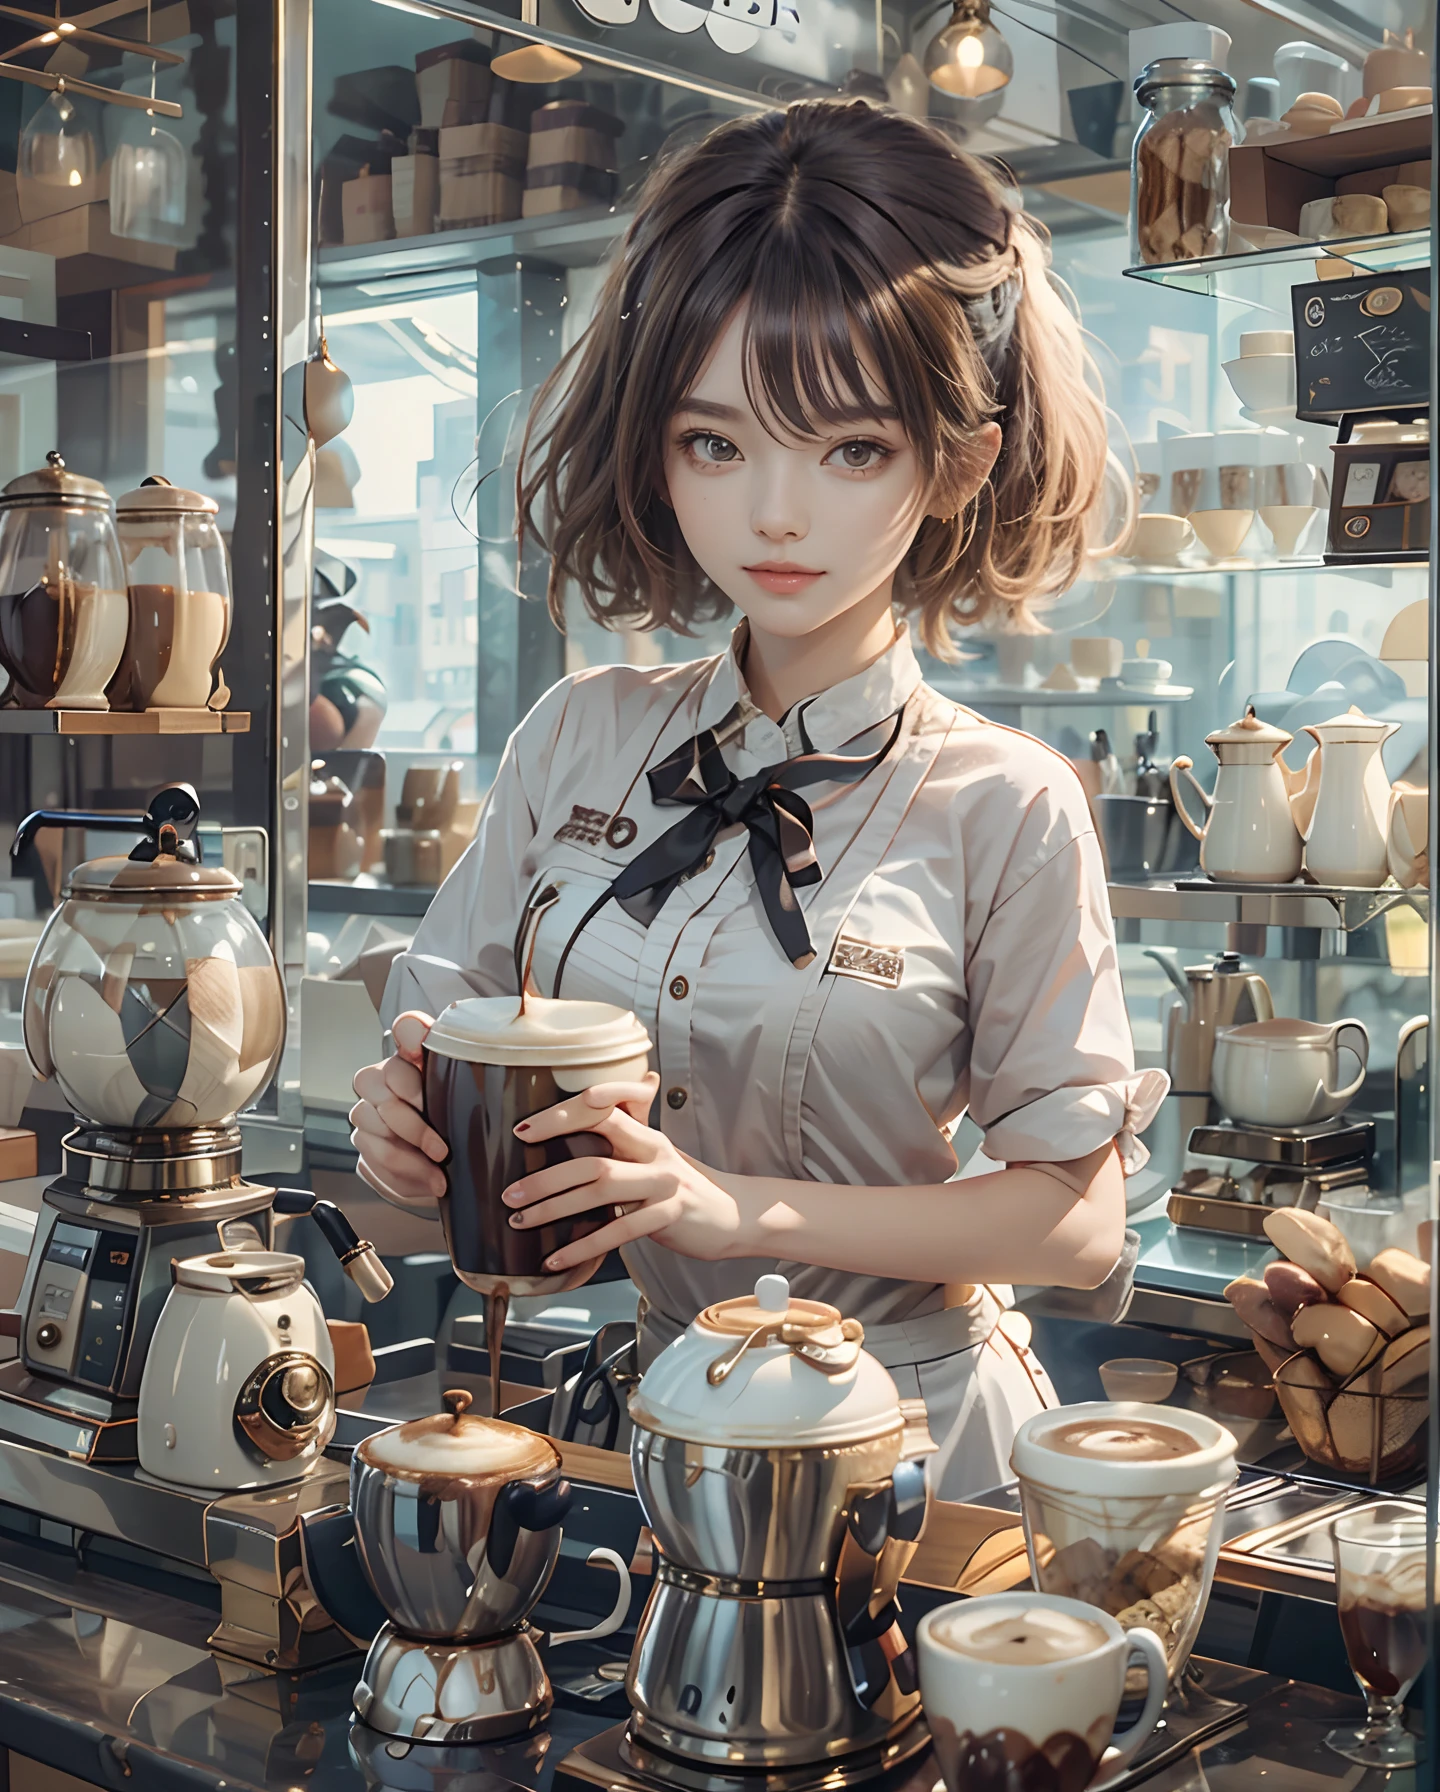 masutepiece、hight resolution、The coffee shop of the future、Woman making delicious coffee、２５Year old girl、１Girl clerk、Looking at the camera、Hair is short、short-cut、smil、Finish as shown in the photo、Coffee and beauty、the skin is white and beautiful、